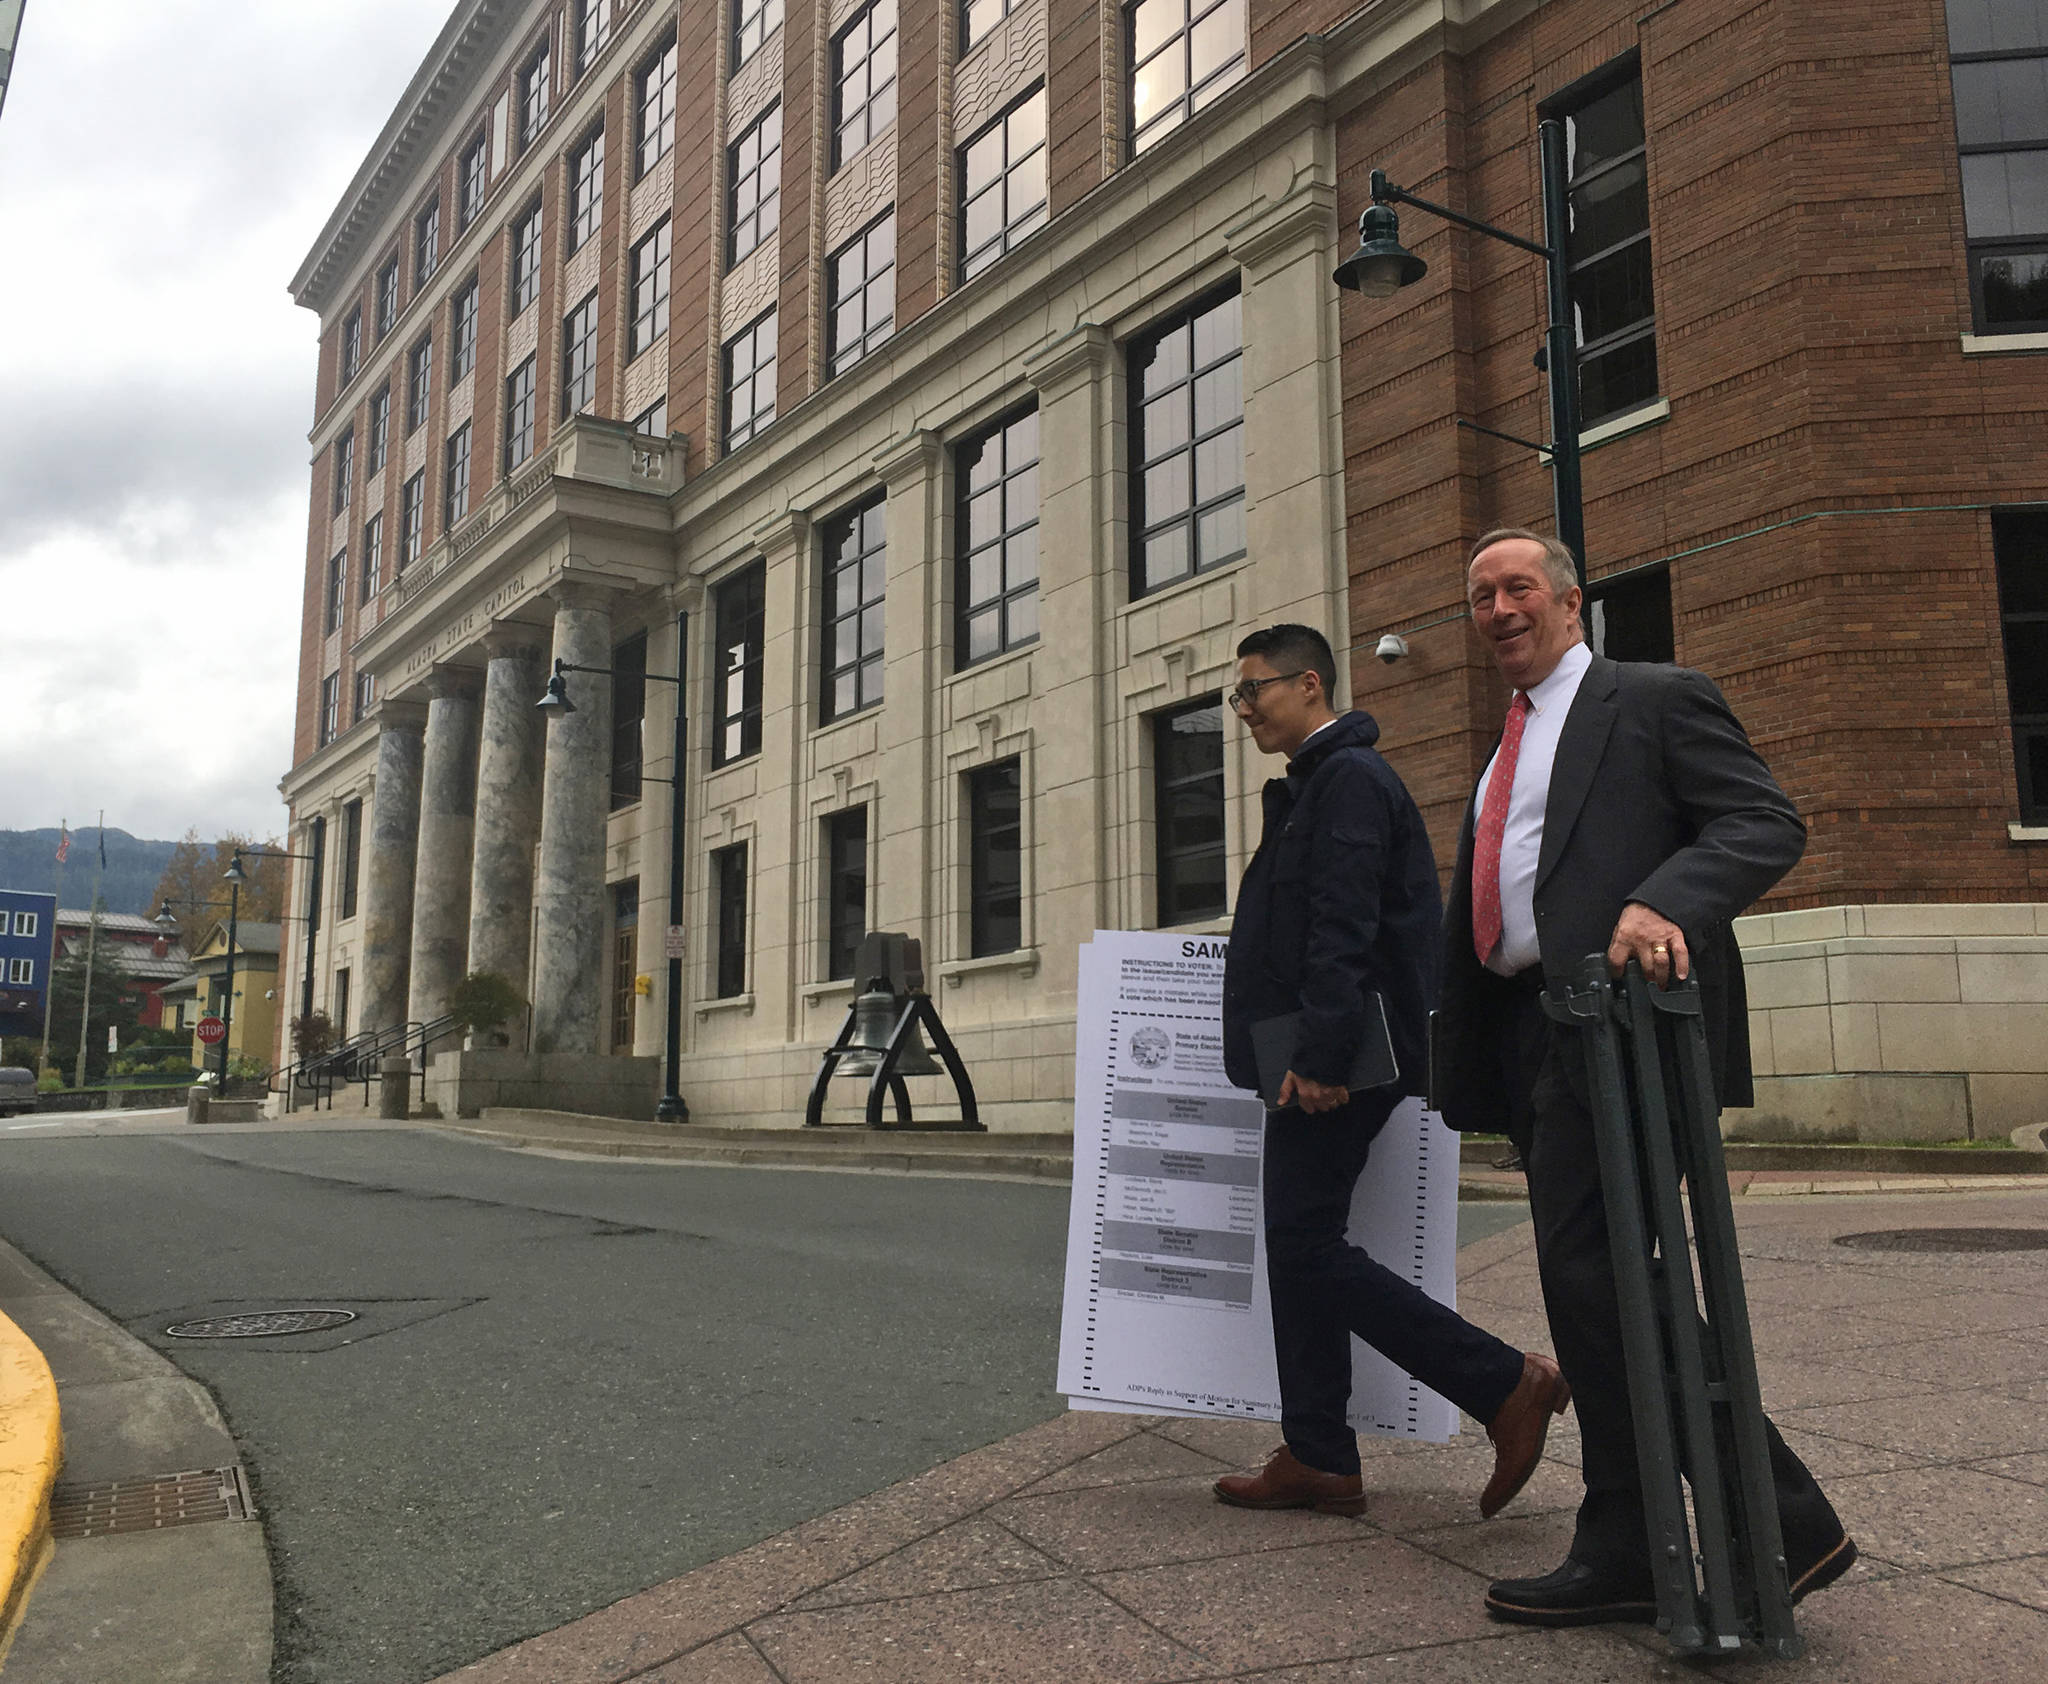 Attorneys Jon Choate, left, and Mark Choate, right, cross 4th Street on Thursday, Sept. 21, 2017. The two men were carrying exhibits to be used in their lawsuit against the state of Alaska on behalf of the Alaska Democratic Party. At background is the Alaska State Capitol. (James Brooks | Juneau Empire)